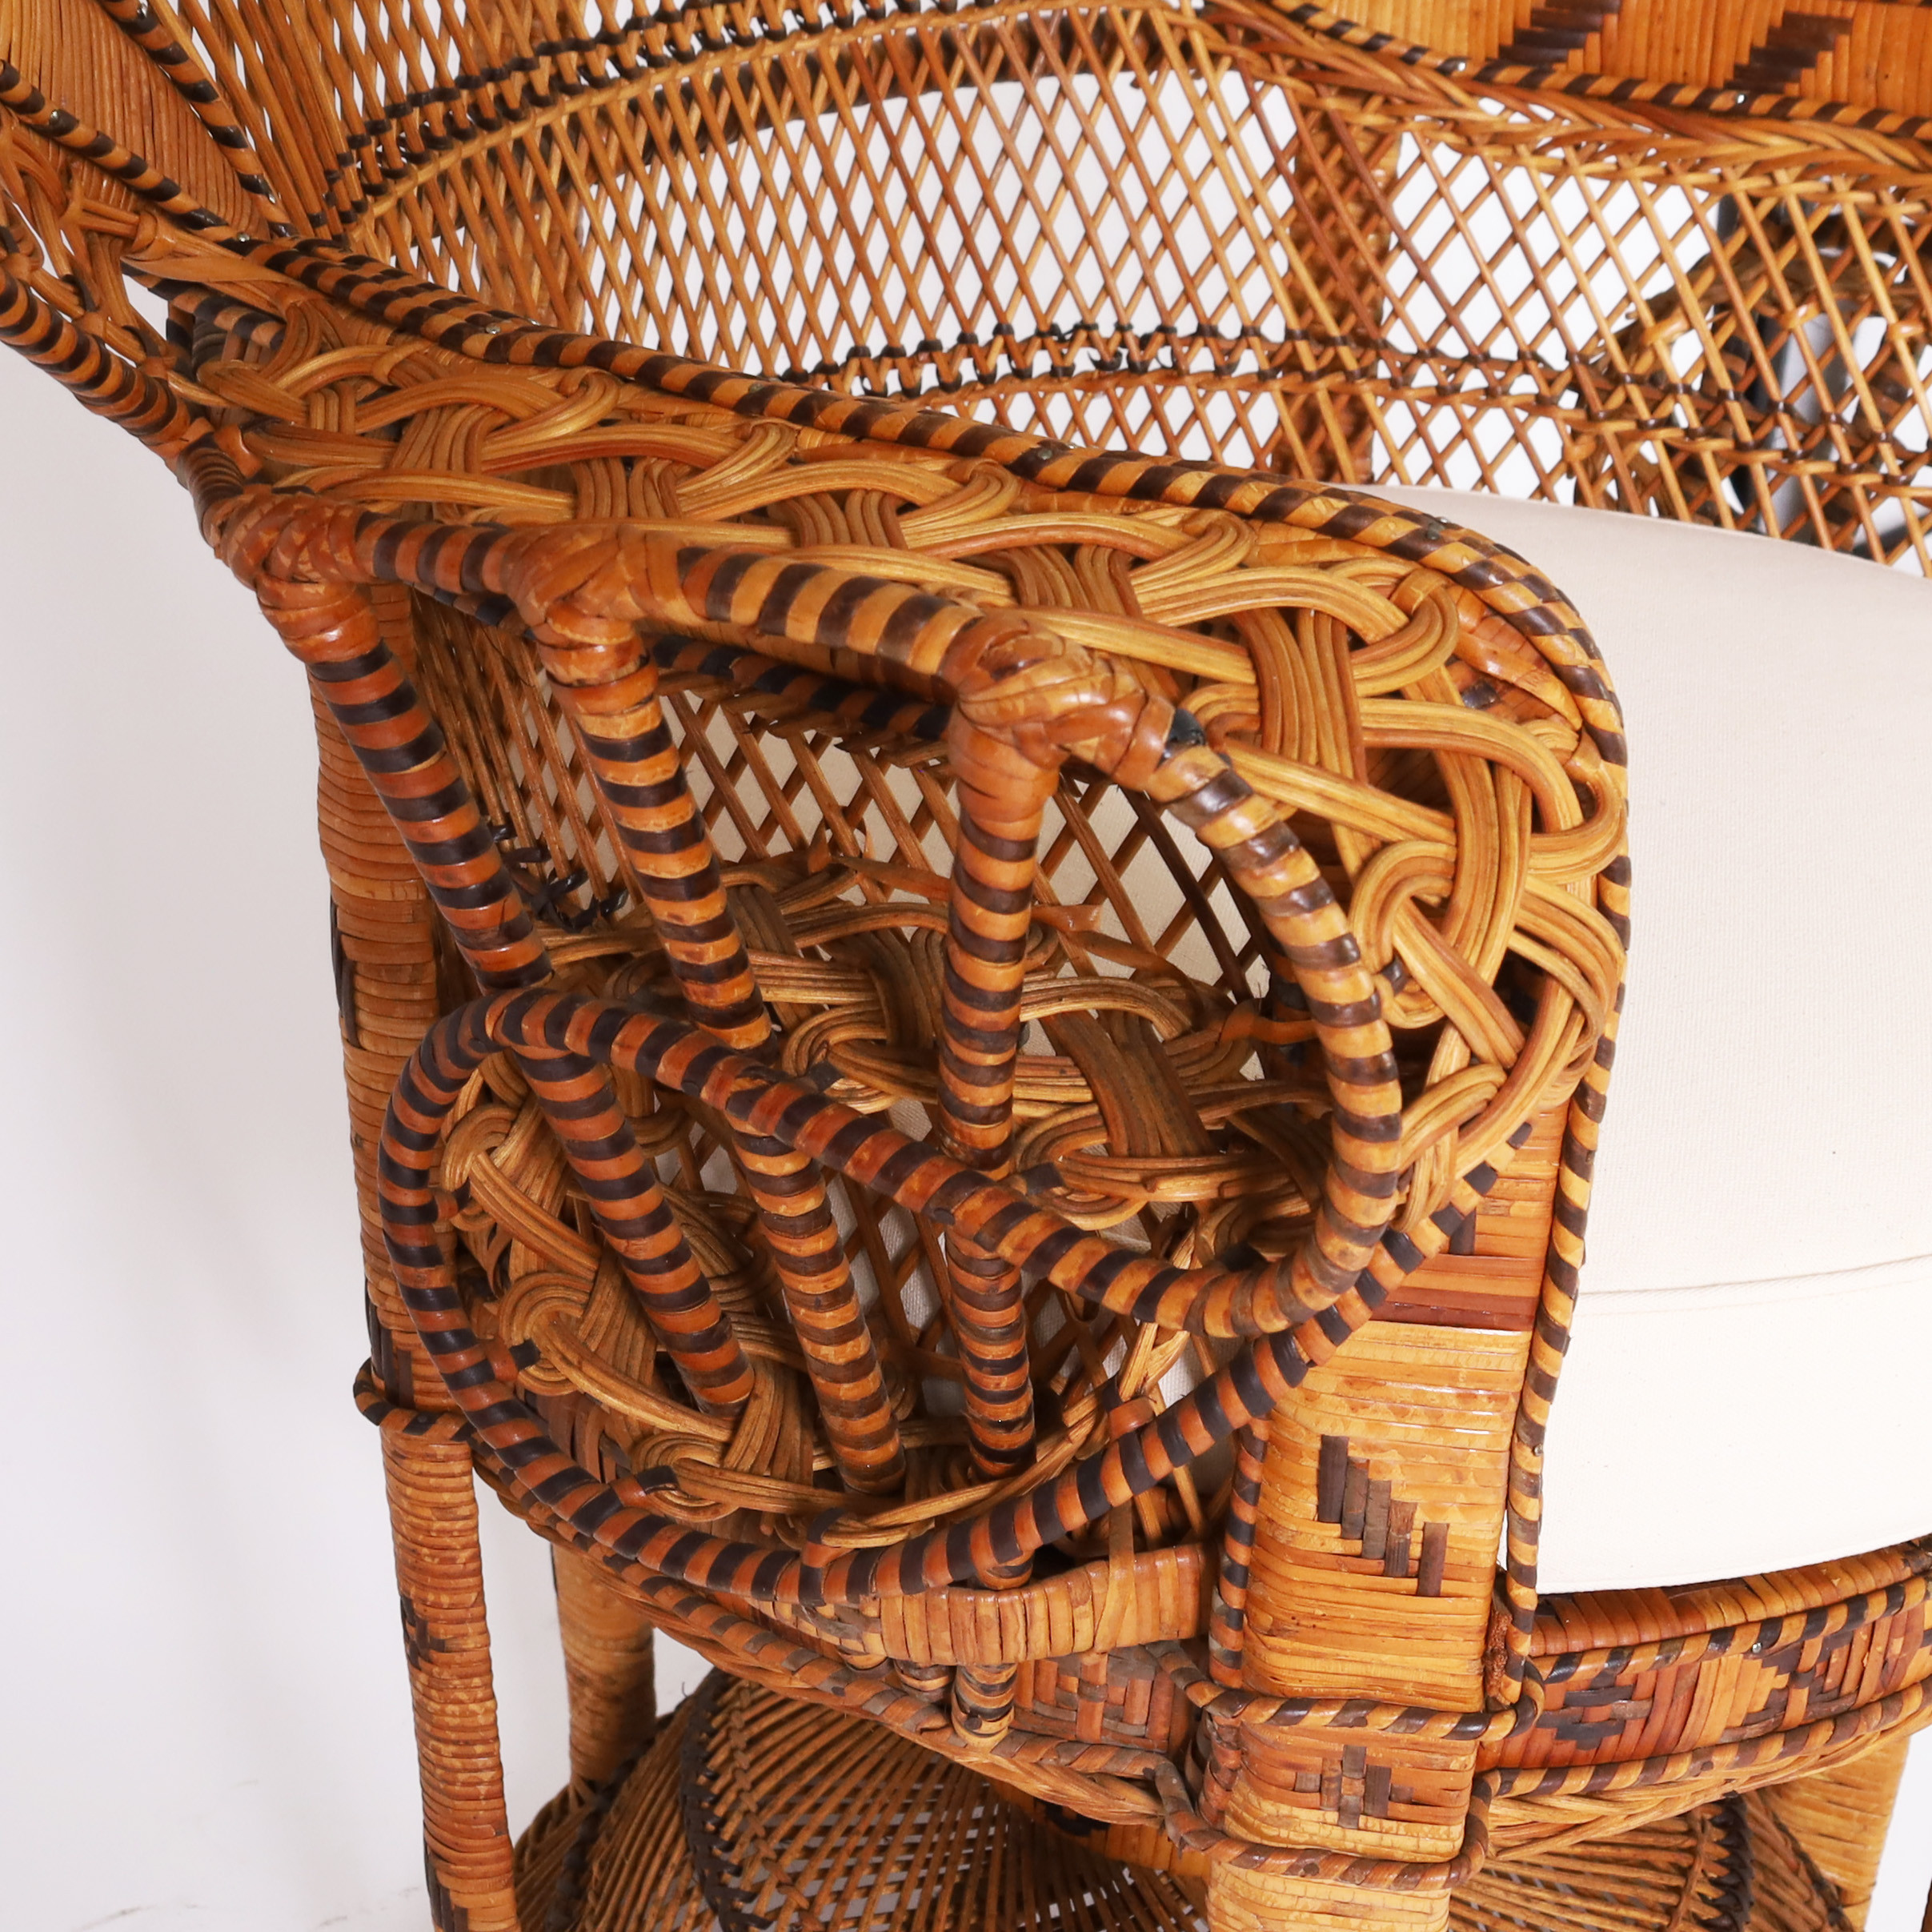 Vintage Anglo Indian Wicker Peacock Chair and Ottoman